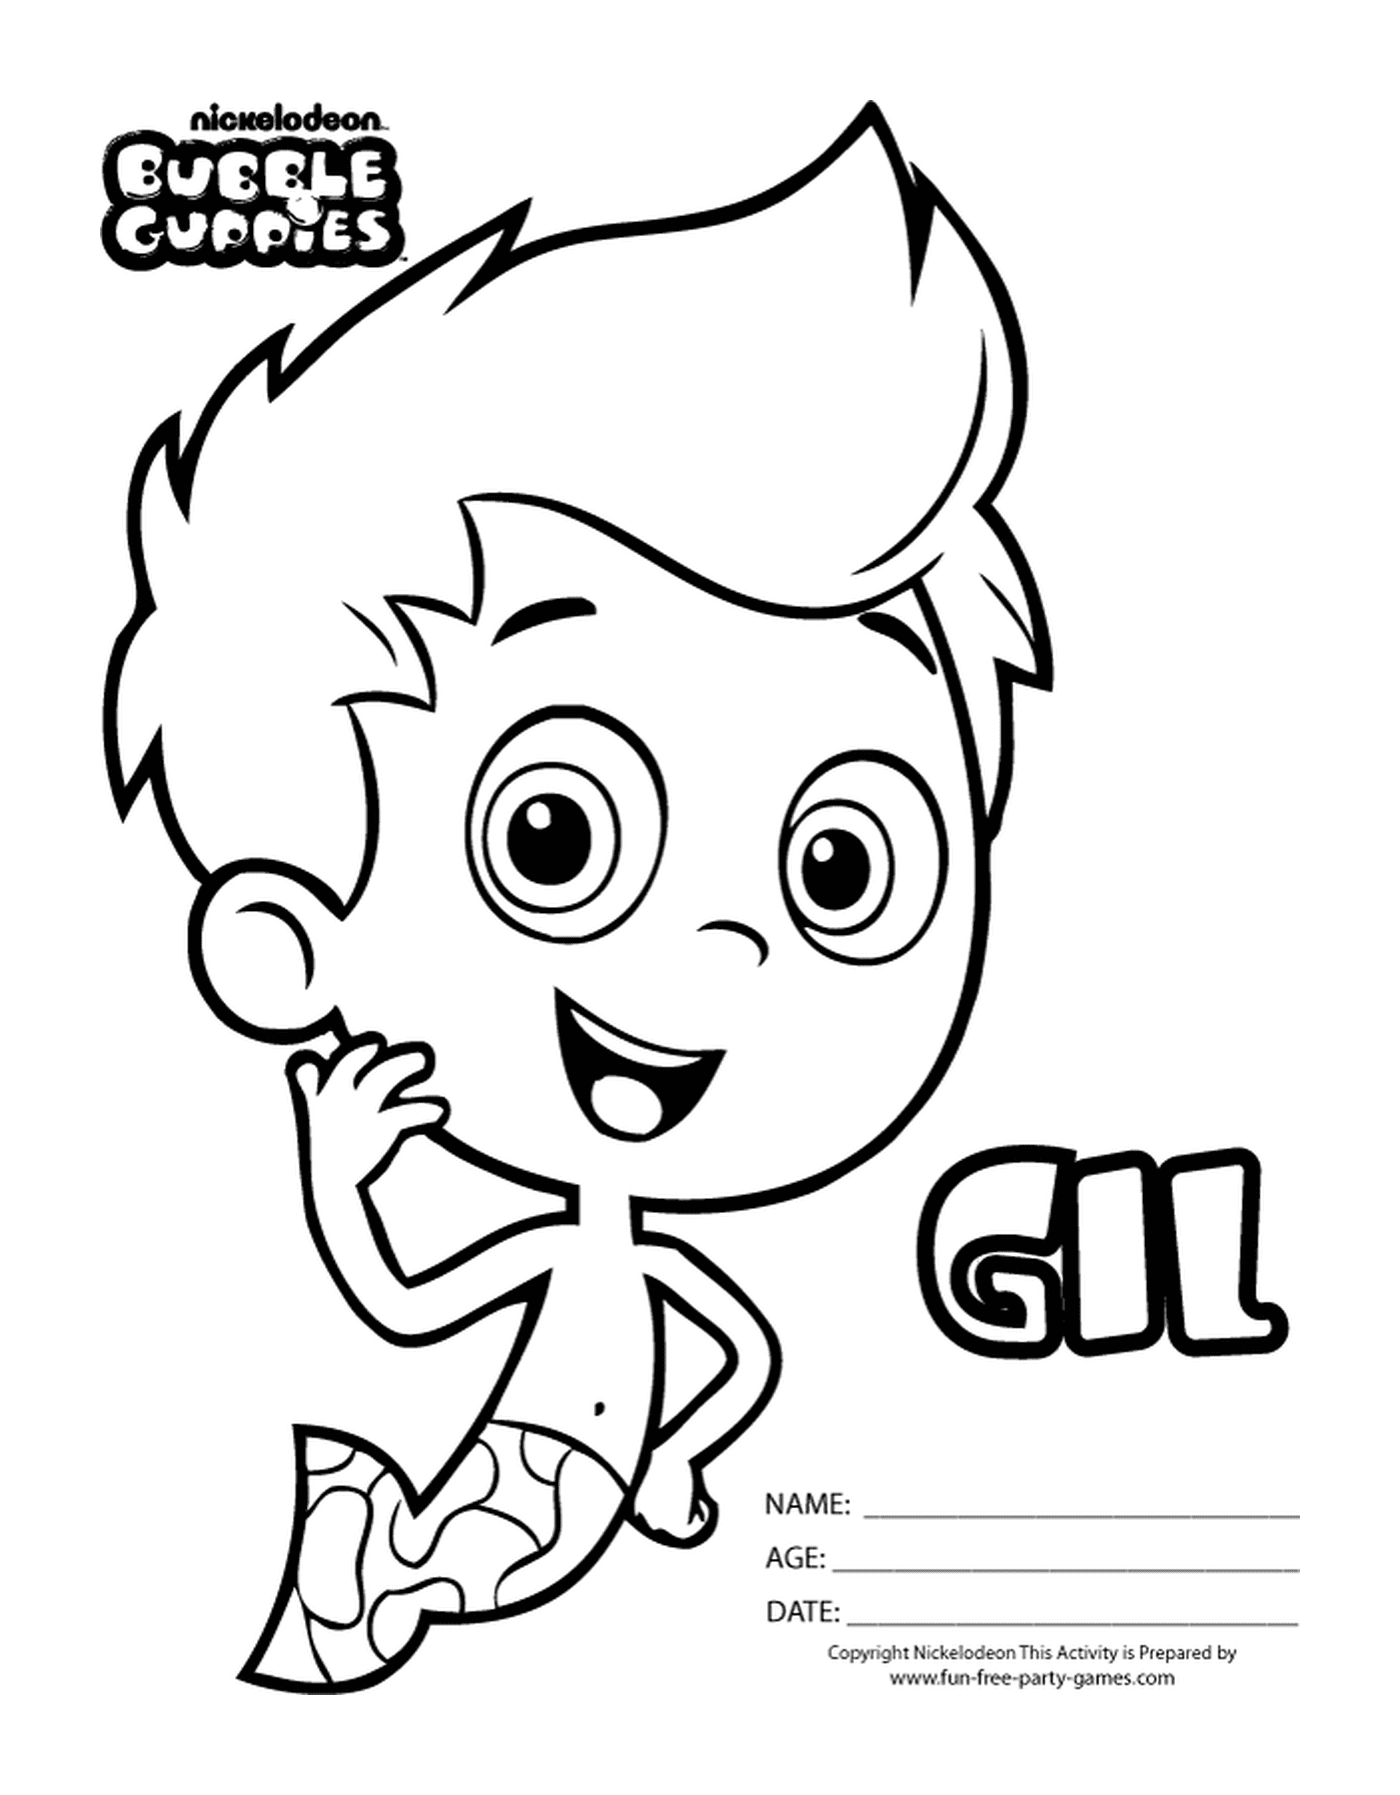 coloriage Bubble Guppies Gil